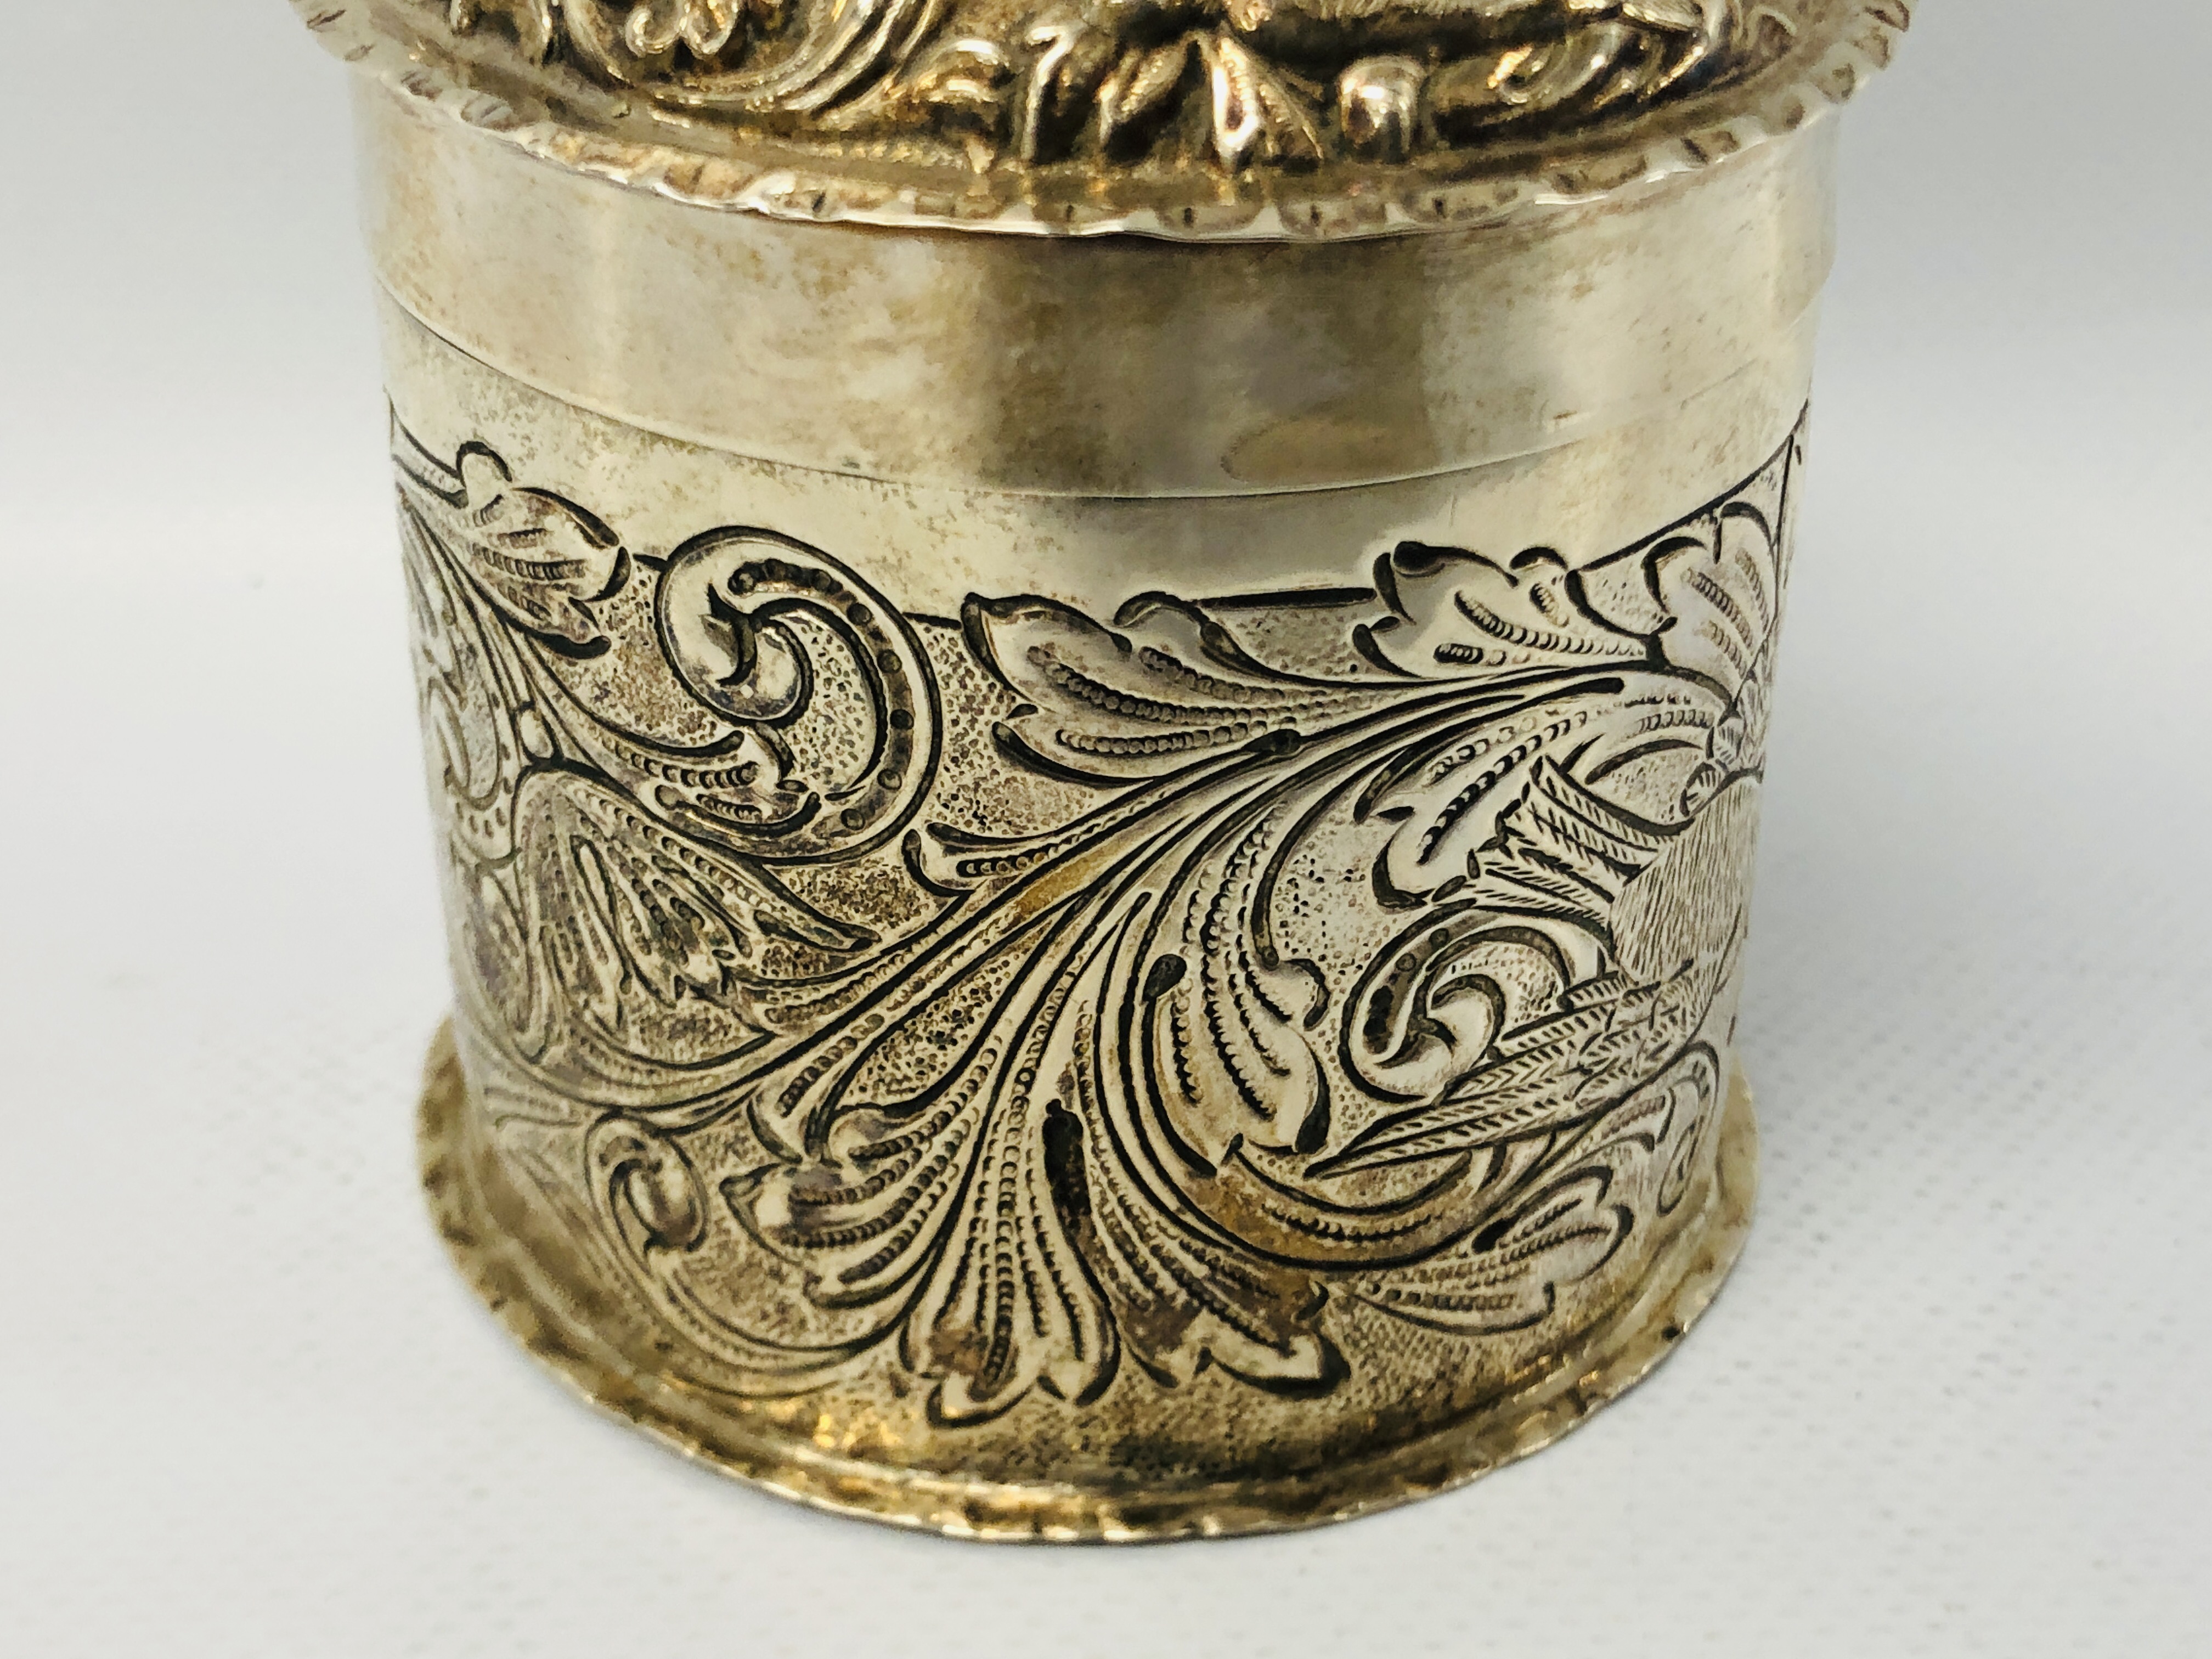 A VICTORIAN SILVER CYLINDRICAL BOX AND COVER DECORATED WITH BIRD LONDON 1888, WILLIAM COMINS - H 8. - Image 15 of 21